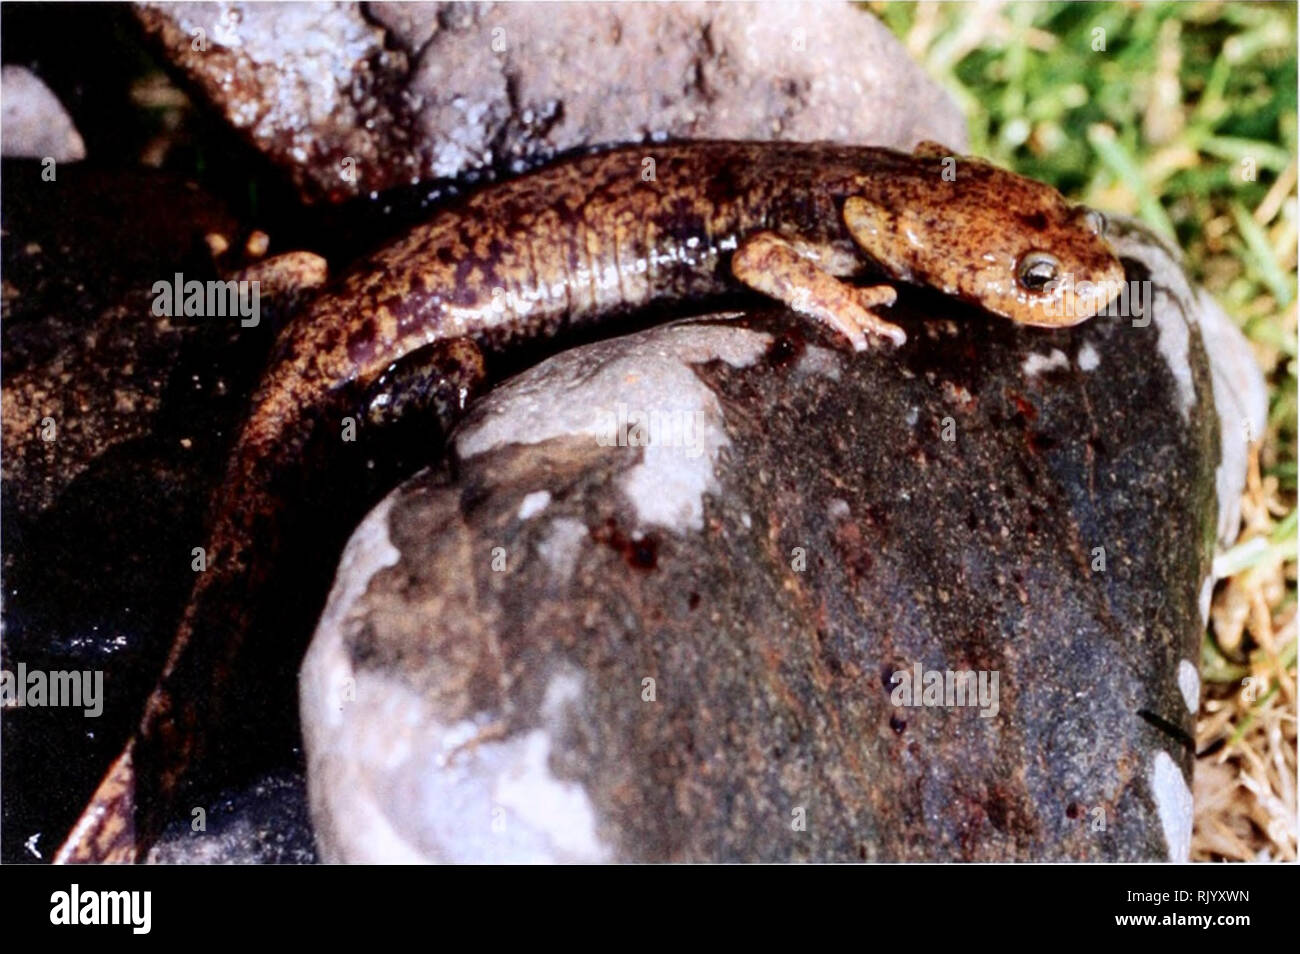 . Asiatic herpetological research. Reptiles -- Asia Periodicals; Amphibians -- Asia Periodicals. 2001 Asiatic Herpetological Research Vol. 9. pp. 6-8 A New Species of Batrachuperus from Northwestern China Mingtao Song2, Xiaomao Zeng1, Guanfu Wu1, Zhijun Liu'and Jinzhong Fu3 Chengdu Institute of Biology, Chinese Academy of Sciences. Chengdu. China 610041. Northern west Institute of Endangered Animals. Xi'an. China 710032.  Department of Zoology. University of Guelph. Guelph. Ontario. Canada NIG 2W1 Abstract.- We describe a new species of salamander in the genus Batrachuperus from Tsinling Mts. Stock Photo